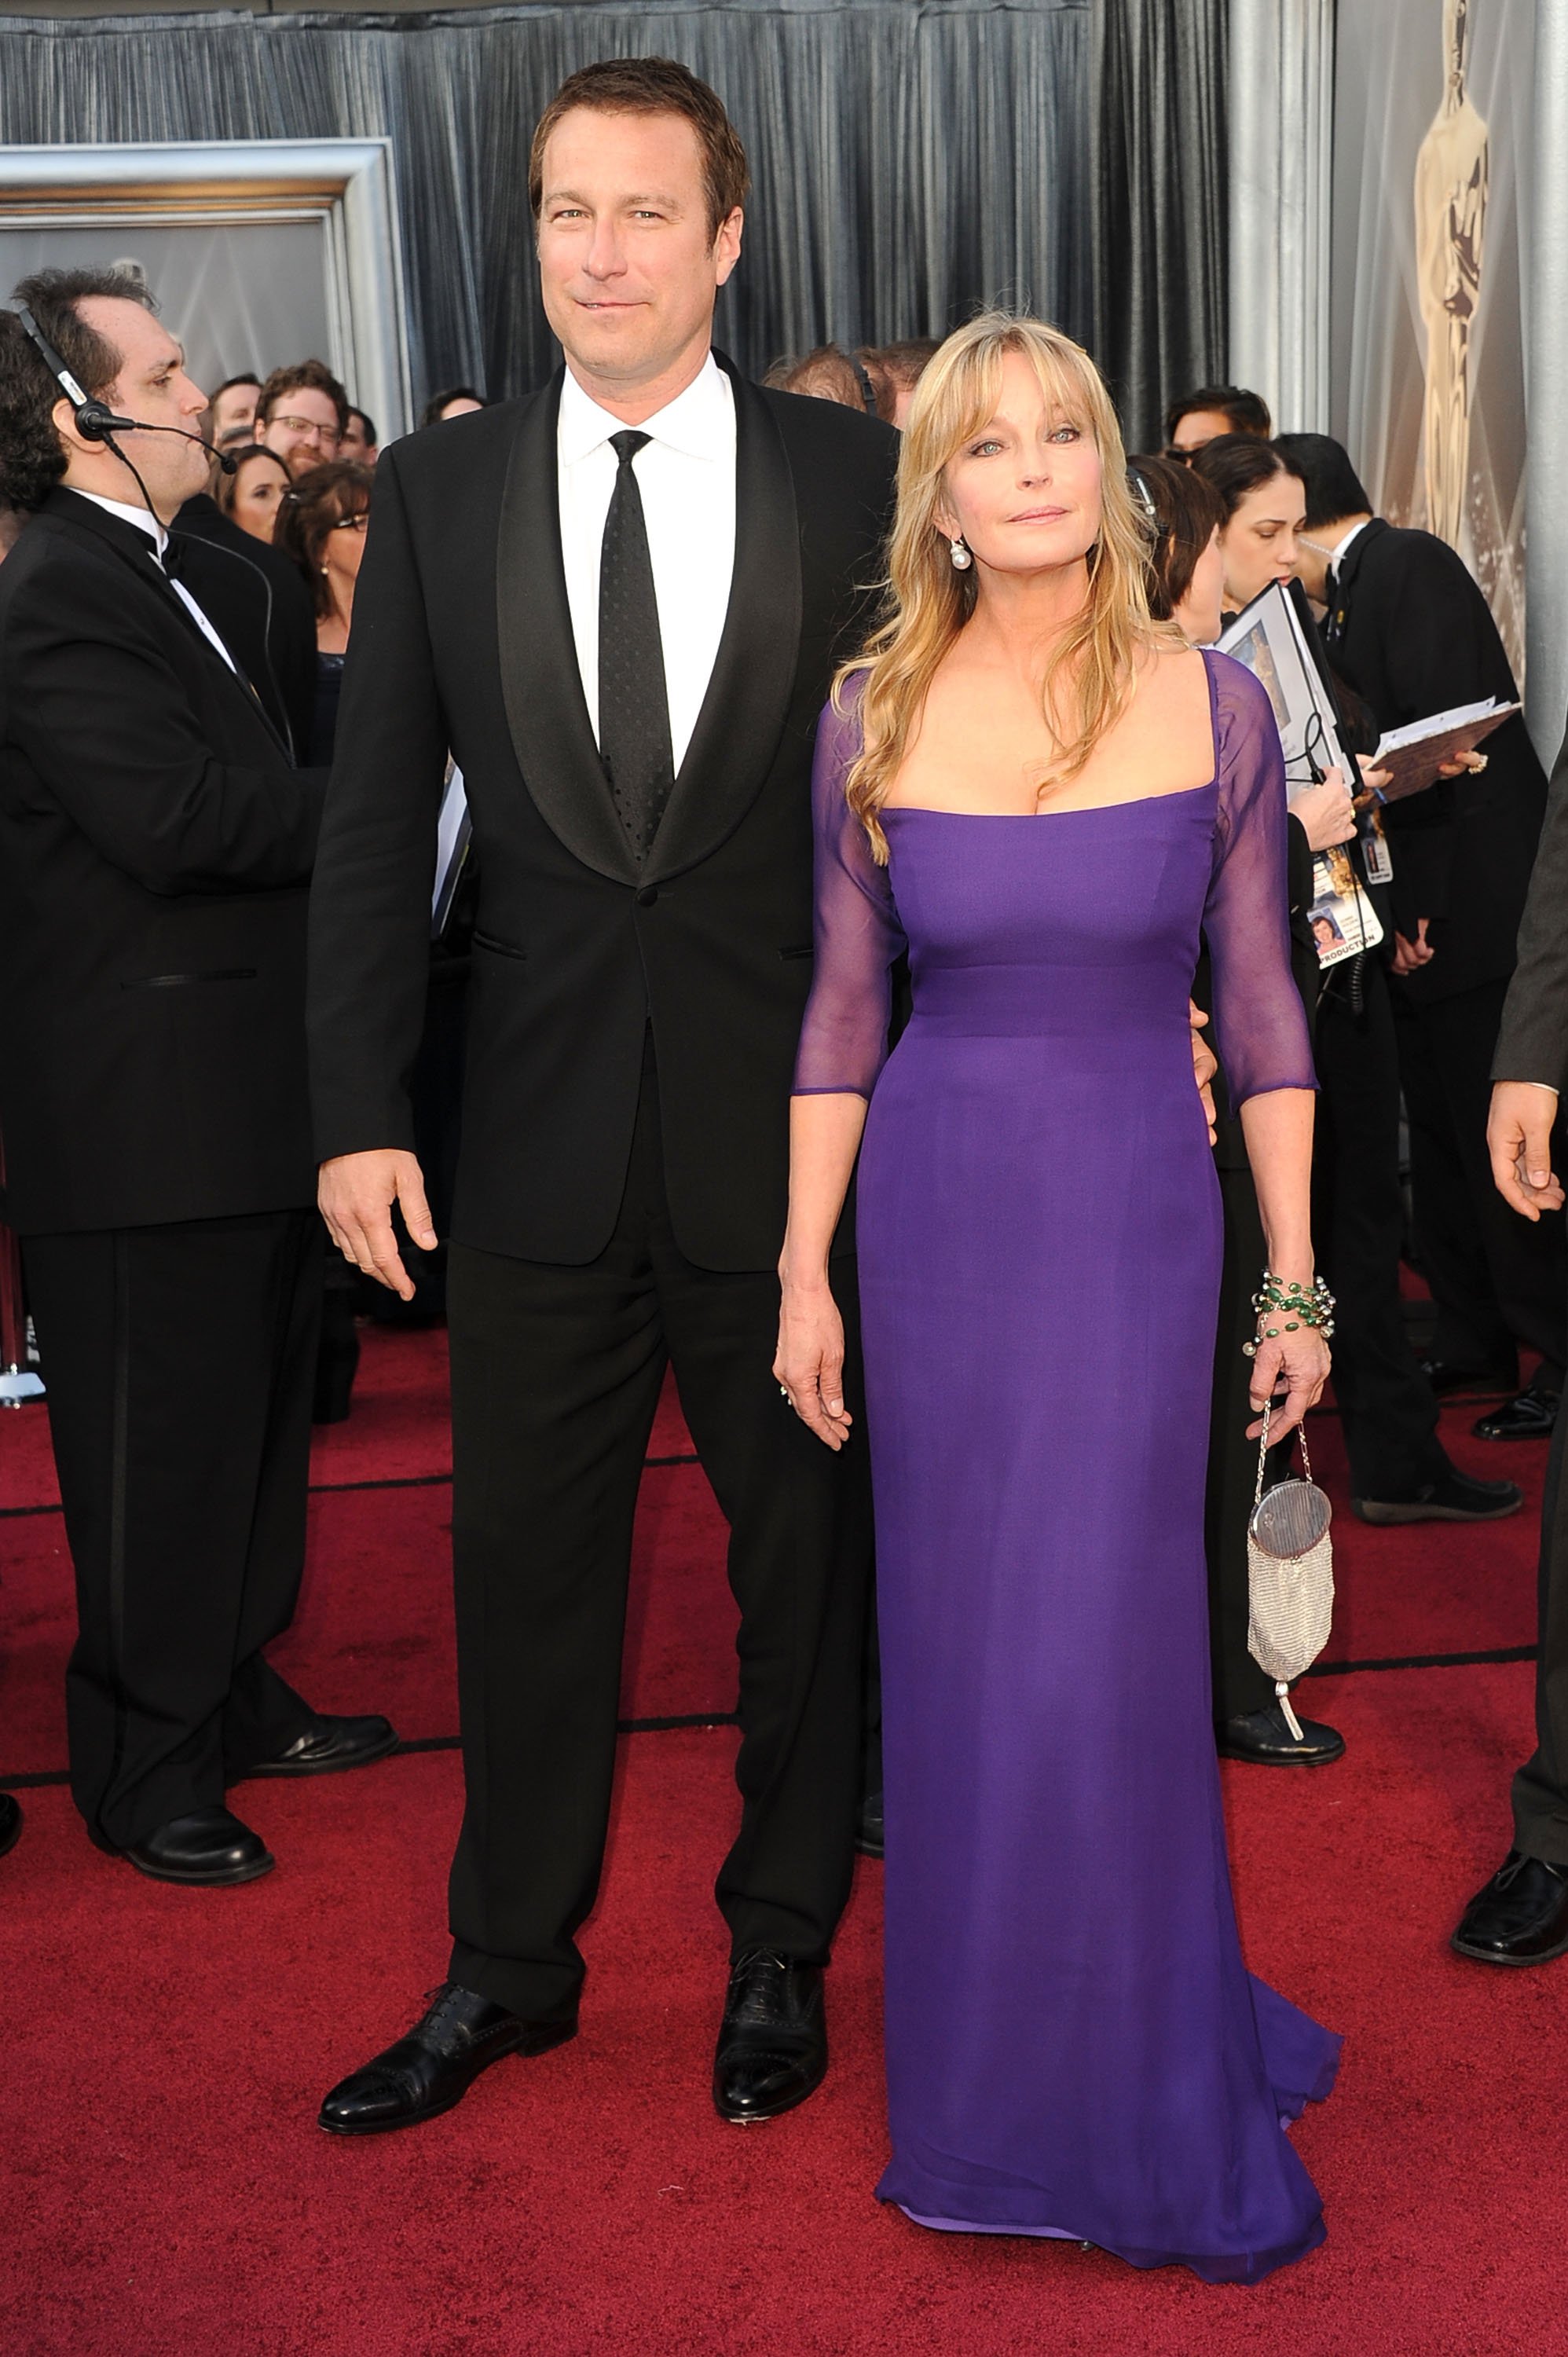  Actor John Corbett and actress Bo Derek arrive at the 84th Annual Academy Awards held at the Hollywood & Highland Center on February 26, 2012 in Hollywood, California | Source: Getty Images